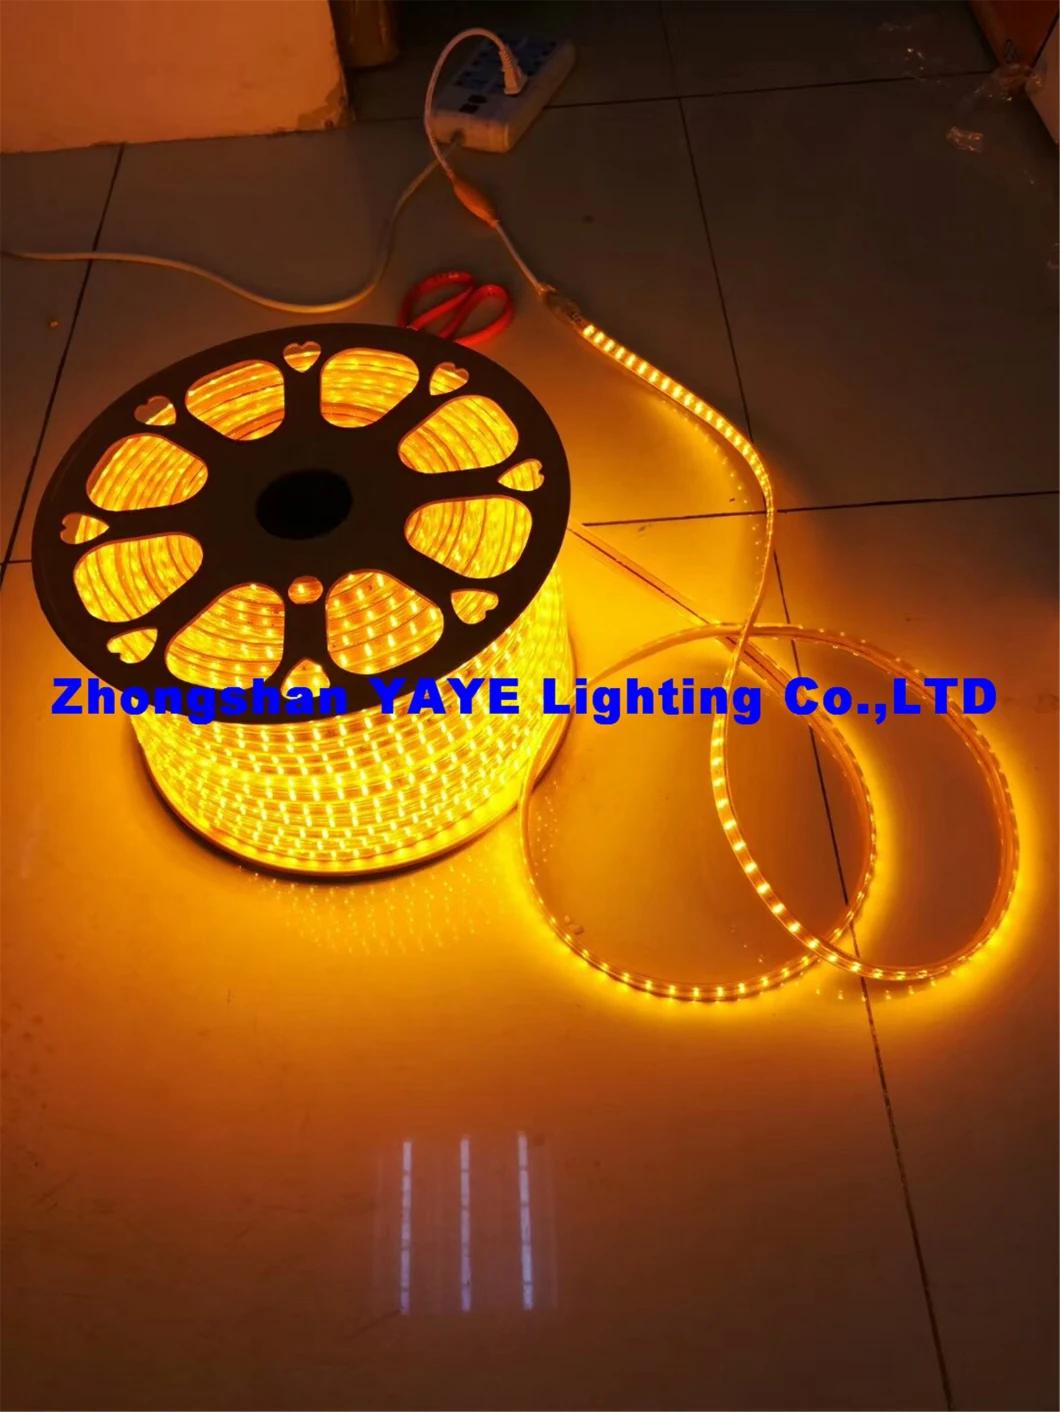 Yaye 18 Hot Sell 12V/220V SMD2835 RGB Waterproof IP68 LED Strip Light / SMD LED Strip Light /LED Decorative Light with 2 Years Warranty